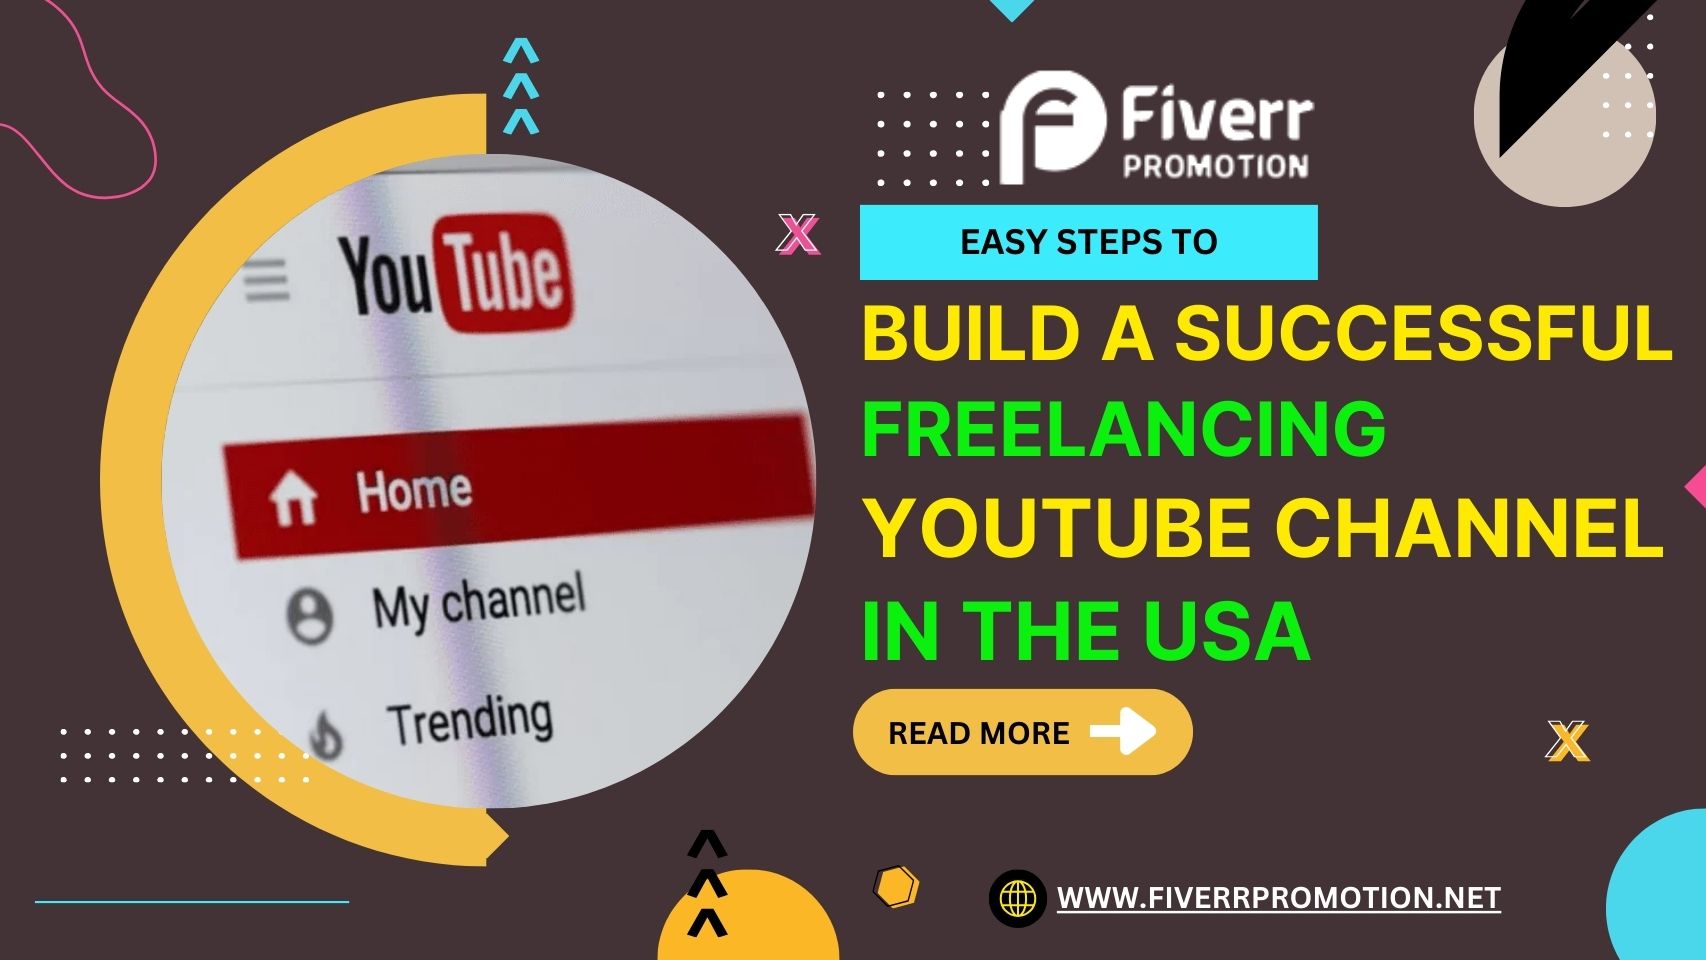 Easy Steps to Build a Successful Freelancing YouTube Channel in the USA